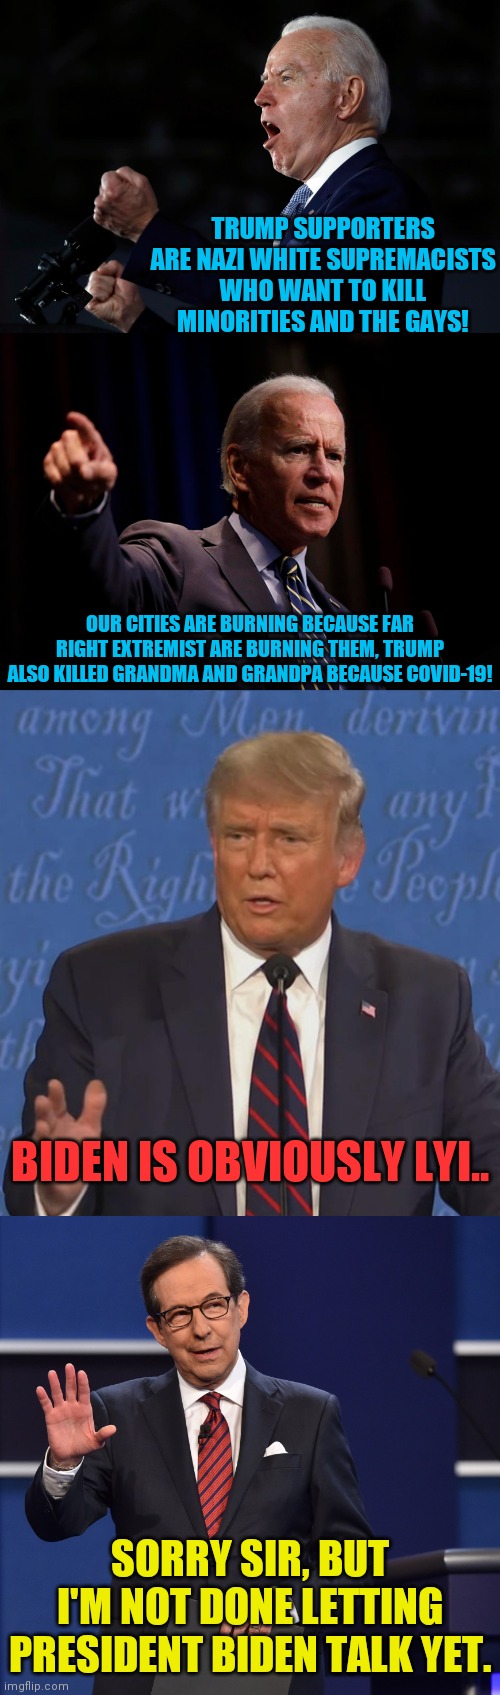 Next Debate Will Give The Moderator The Ability To Mute Trump | TRUMP SUPPORTERS ARE NAZI WHITE SUPREMACISTS WHO WANT TO KILL MINORITIES AND THE GAYS! OUR CITIES ARE BURNING BECAUSE FAR RIGHT EXTREMIST ARE BURNING THEM, TRUMP ALSO KILLED GRANDMA AND GRANDPA BECAUSE COVID-19! BIDEN IS OBVIOUSLY LYI.. SORRY SIR, BUT I'M NOT DONE LETTING PRESIDENT BIDEN TALK YET. | image tagged in chris wallace,trump 2020,2020 elections,drstrangmeme,voter fraud,democrat party | made w/ Imgflip meme maker